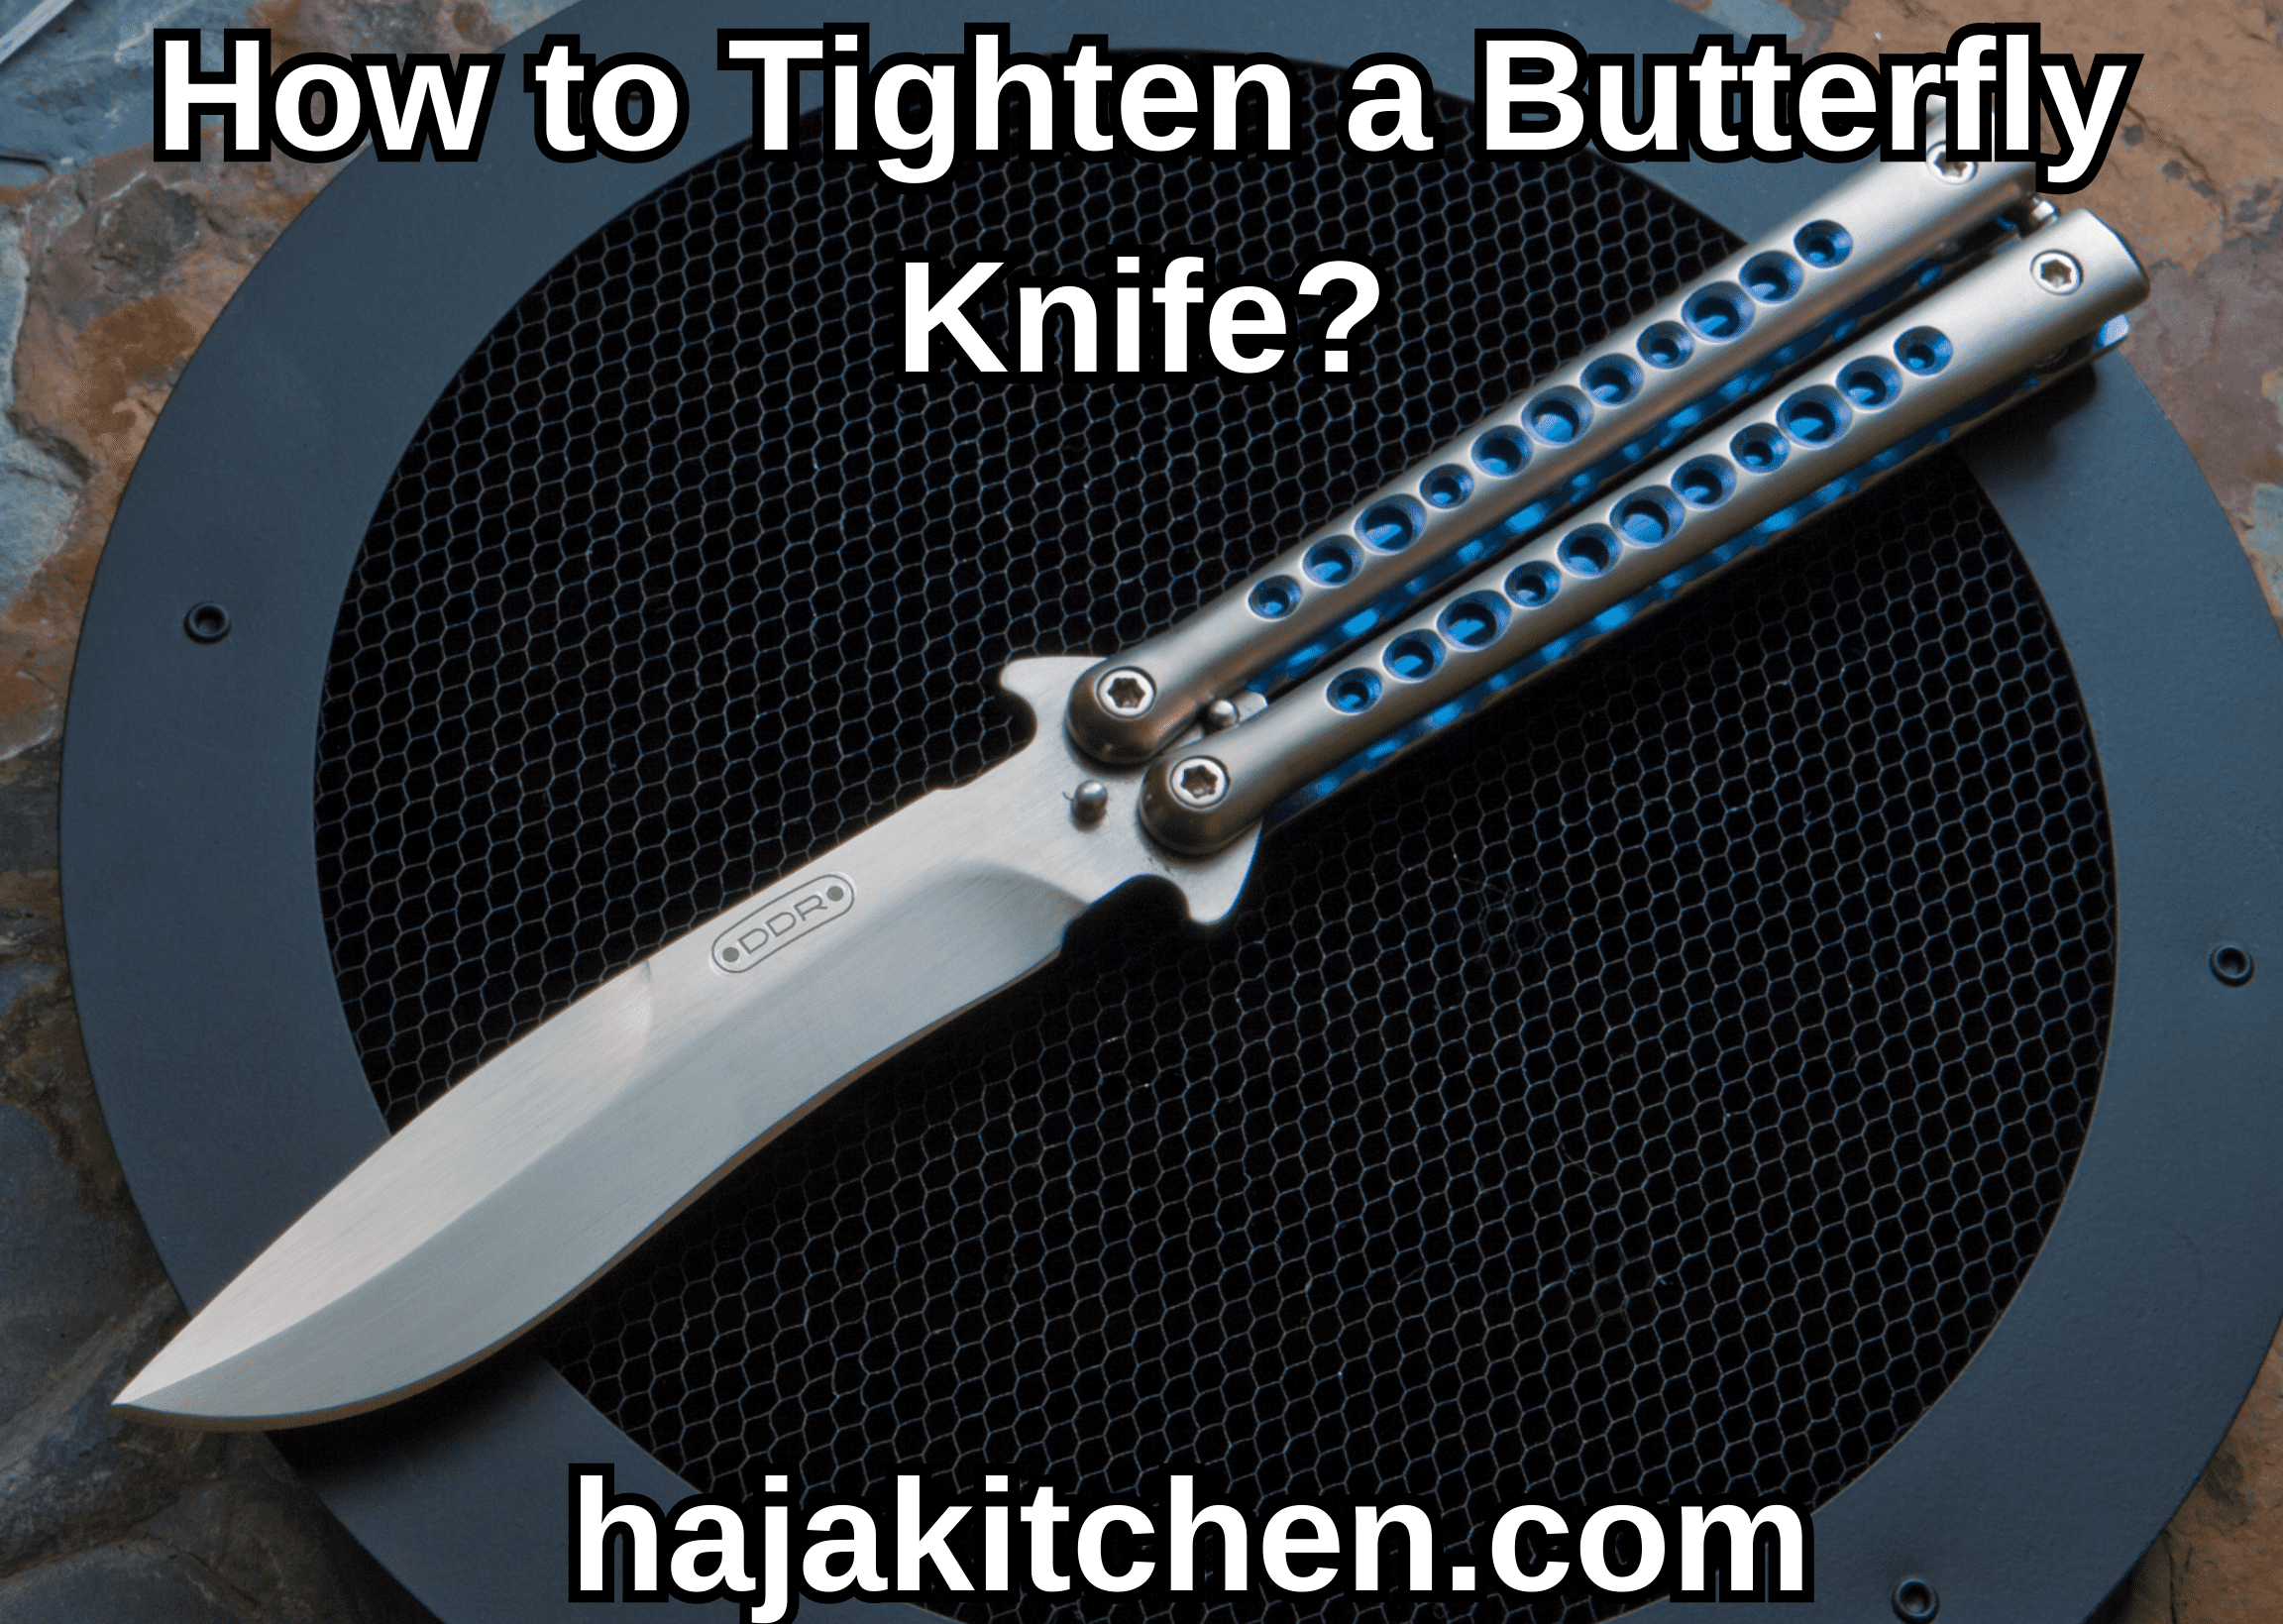 How to Tighten a Butterfly Knife